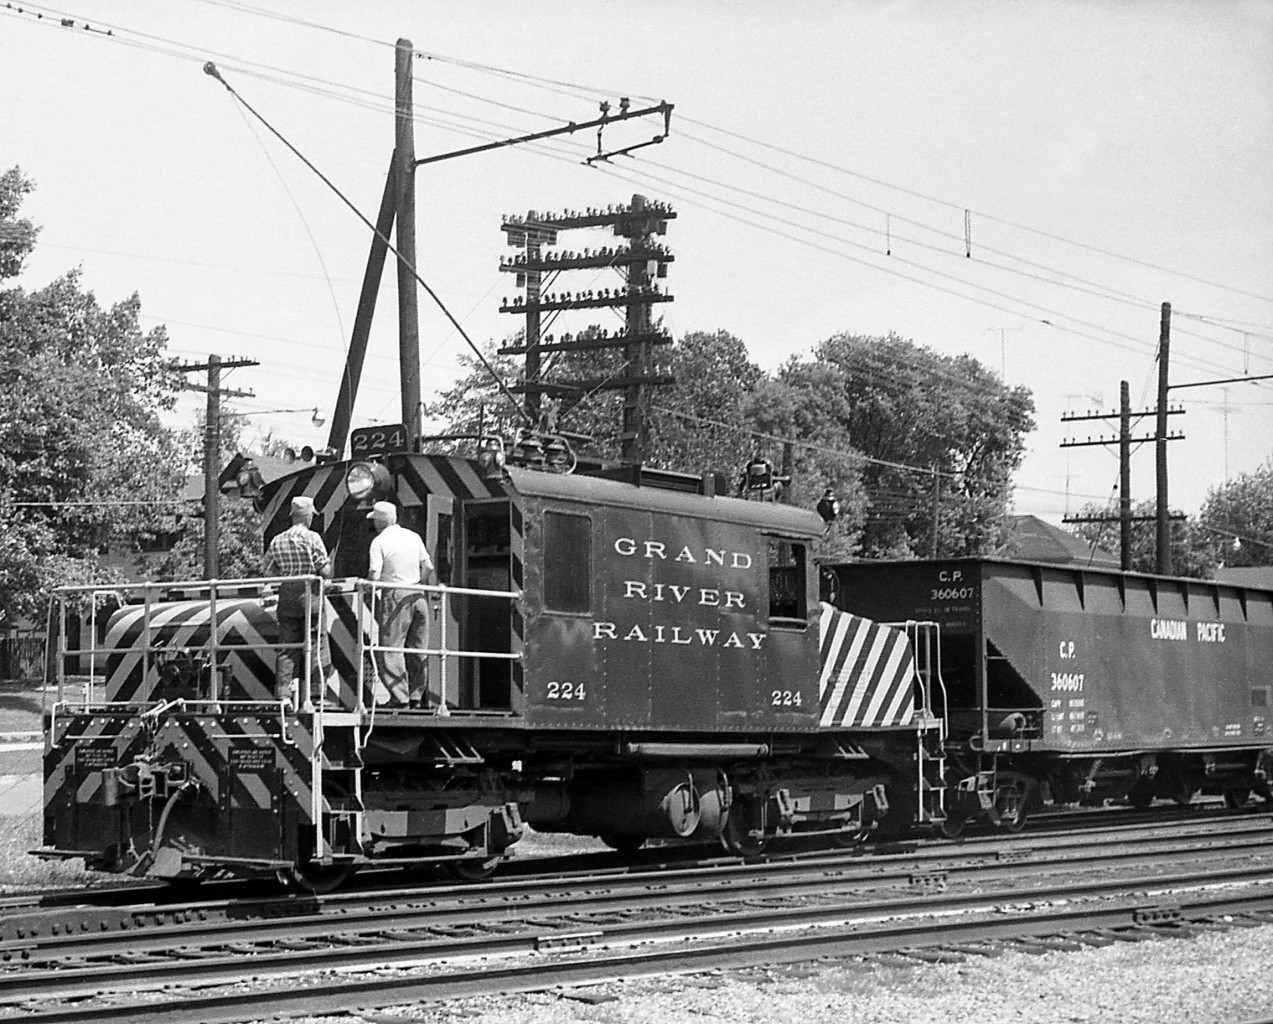 Grand River Railway freight motor 224 sits on the interchange tracks with the CPR in front of Galt Station in 1961, nearing the end of her career during the last year of GRR/LE&N electric operations.